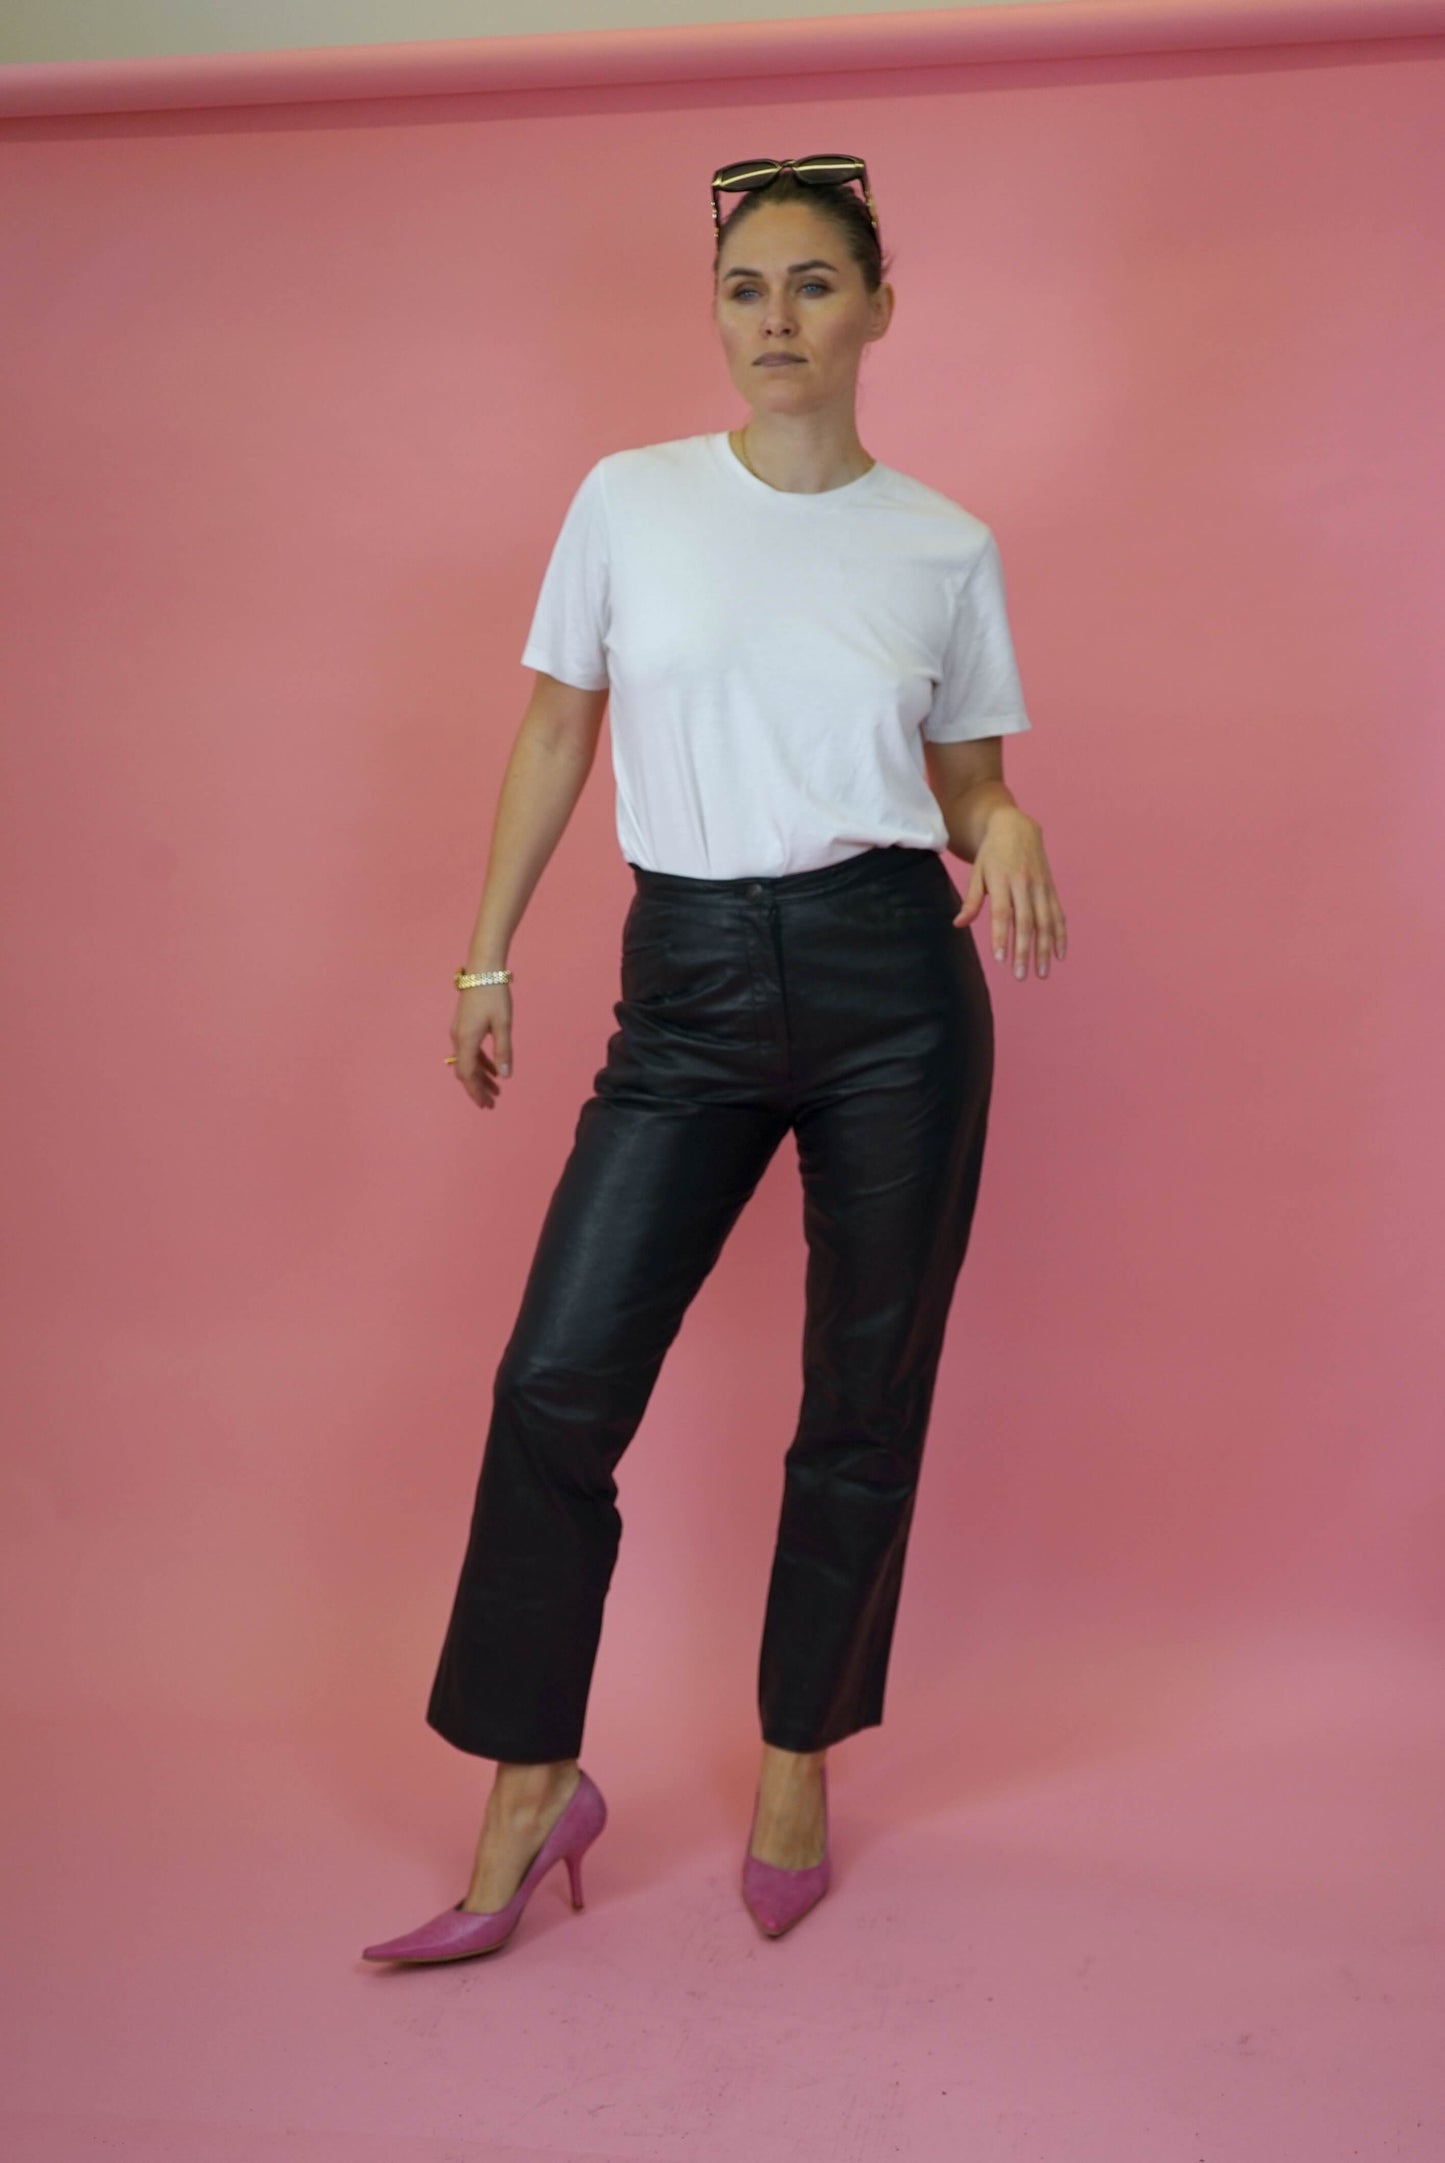 Black High Waisted Women's Leather Trousers Vintage Size M W31-32 UK Size 12 | EU size 42